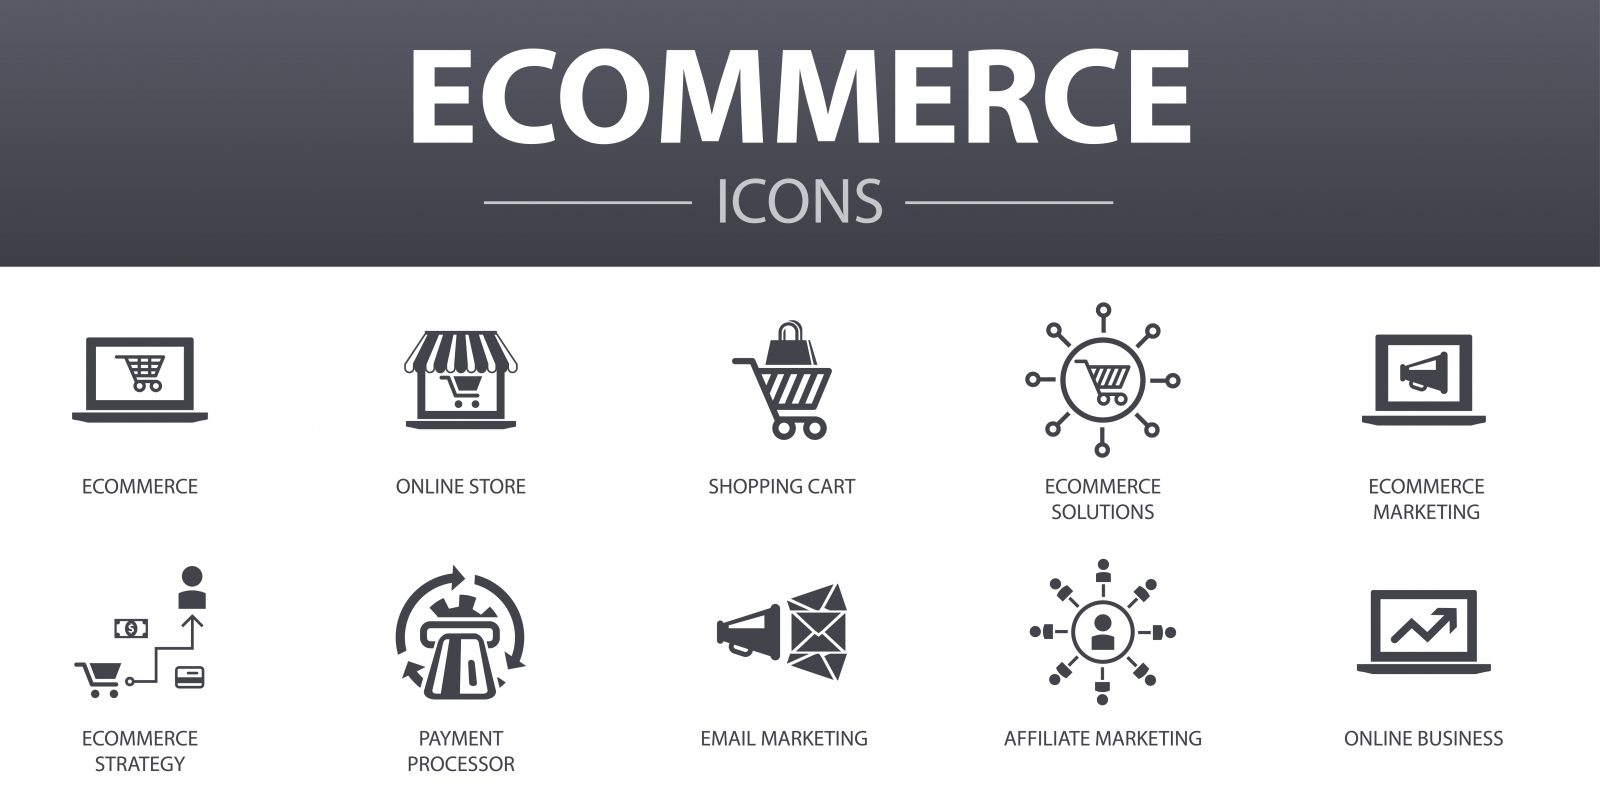 ecommerce simple concept icons set contains 